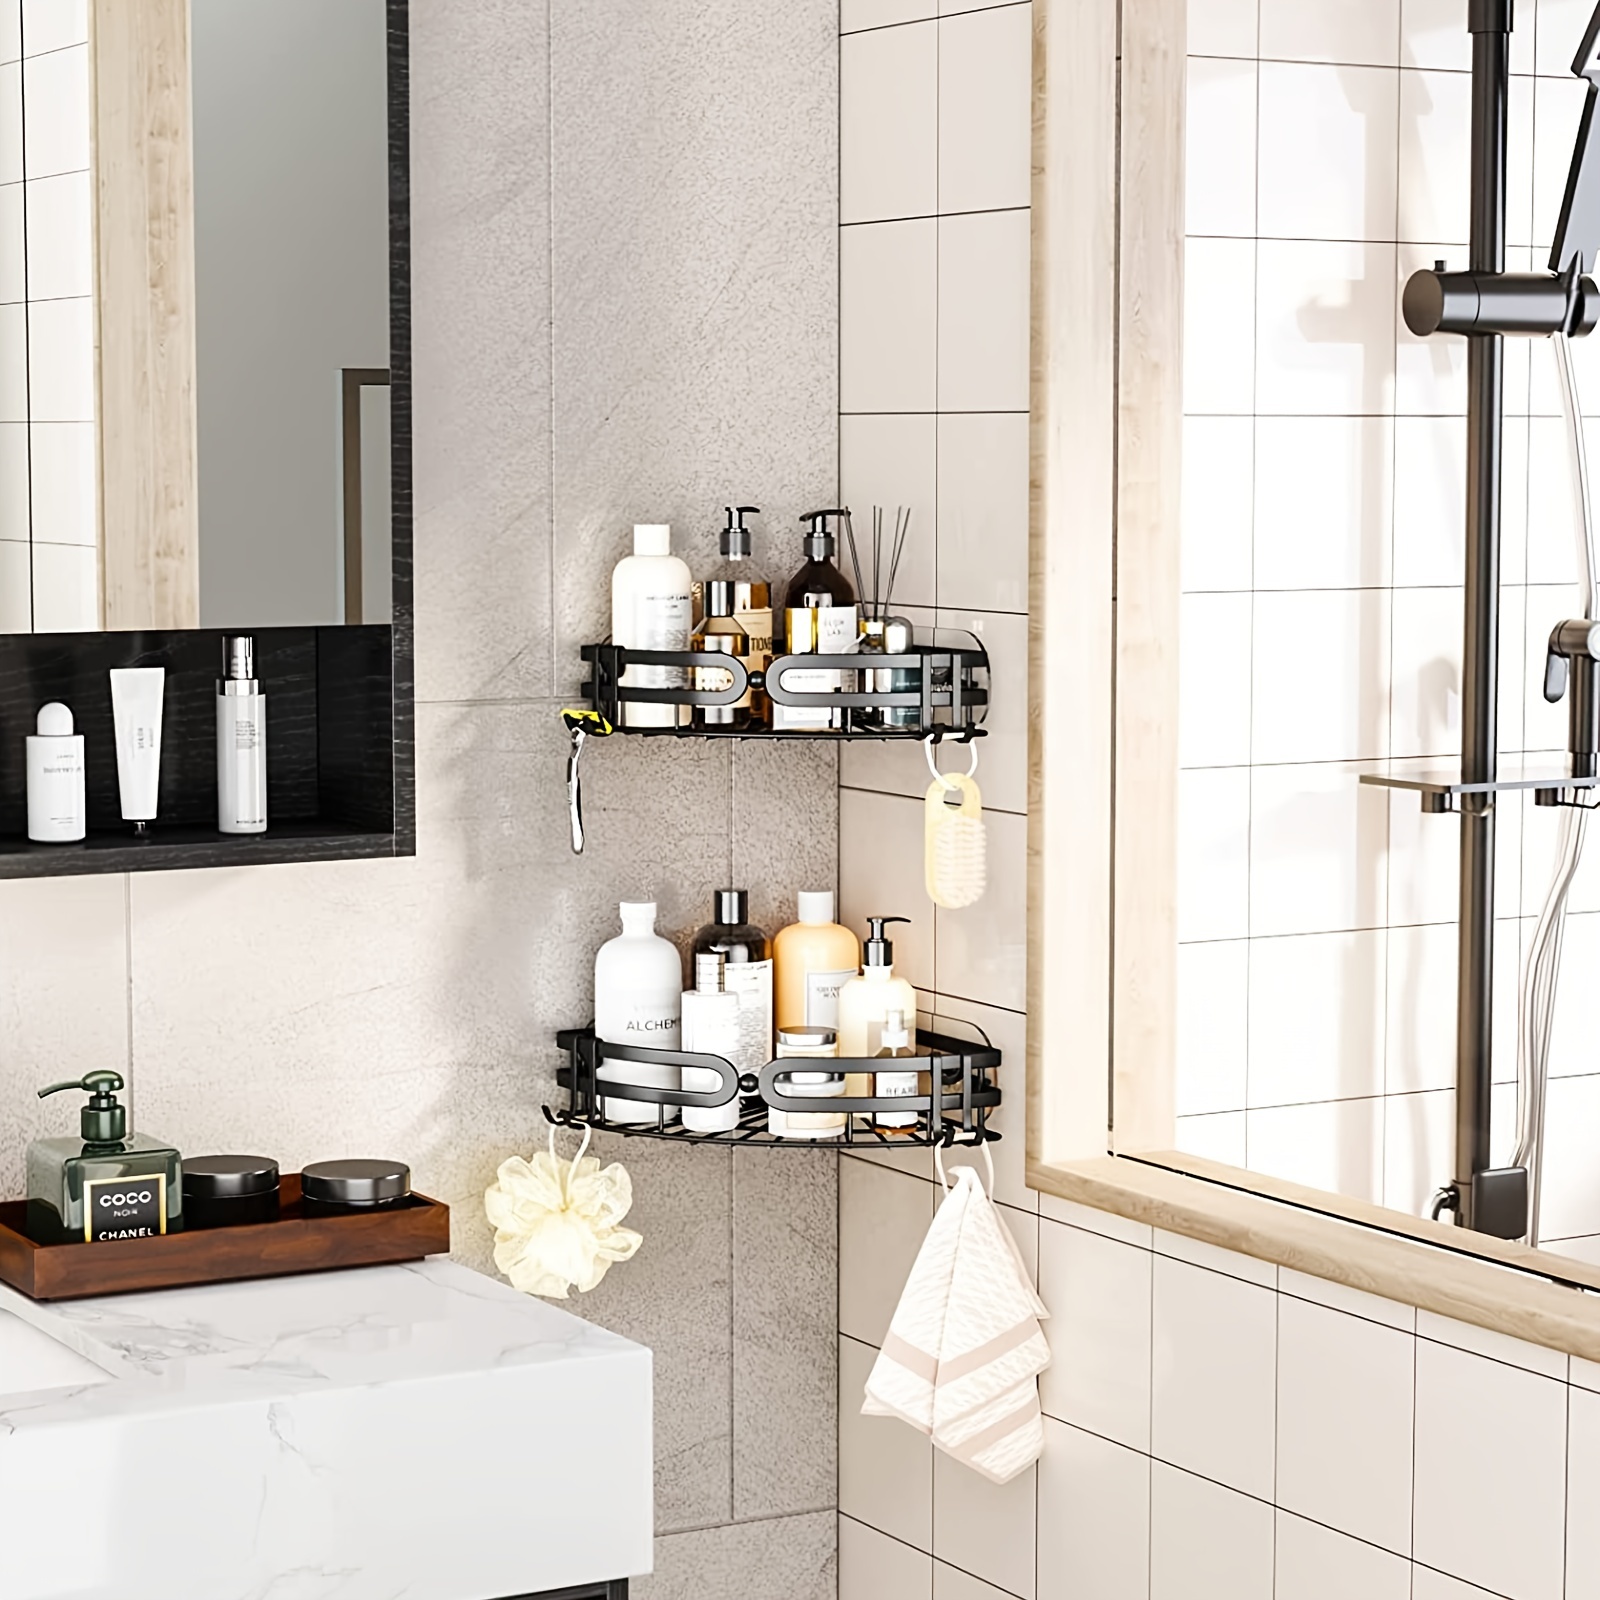 5 Tub and Shower Storage Tips